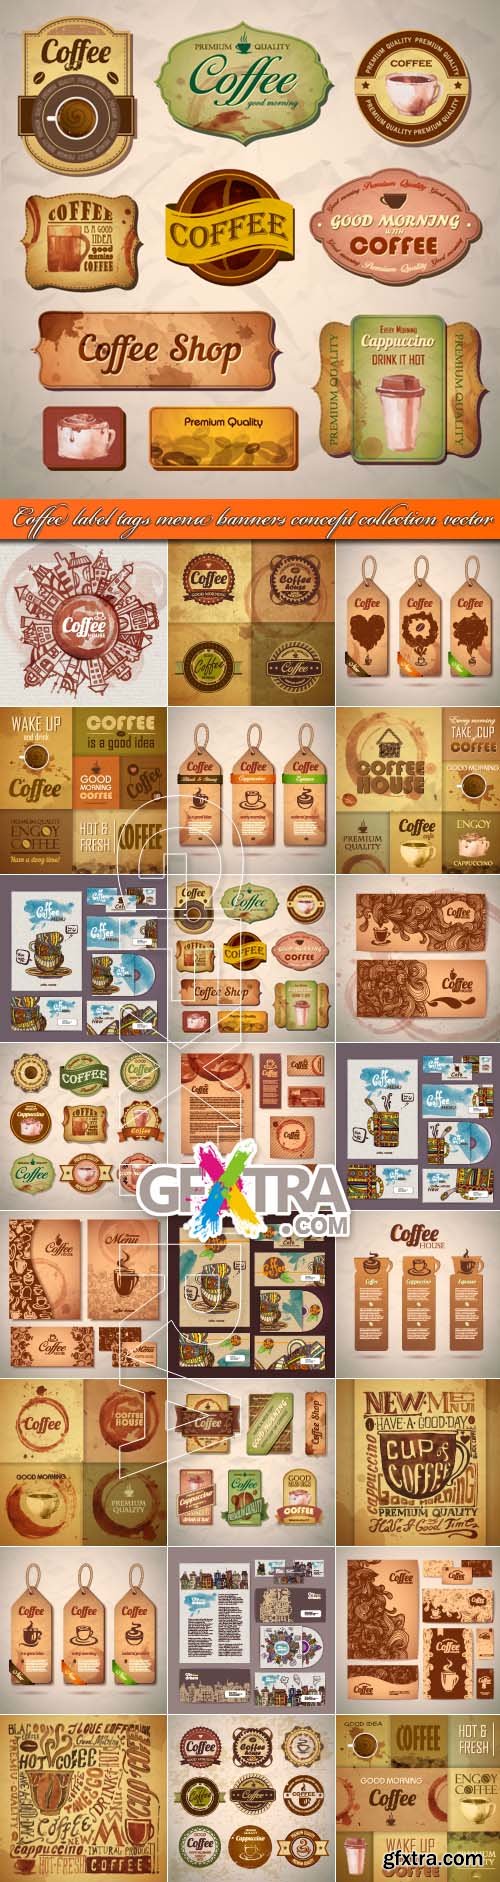 Coffee label tags menu banners concept collection vector